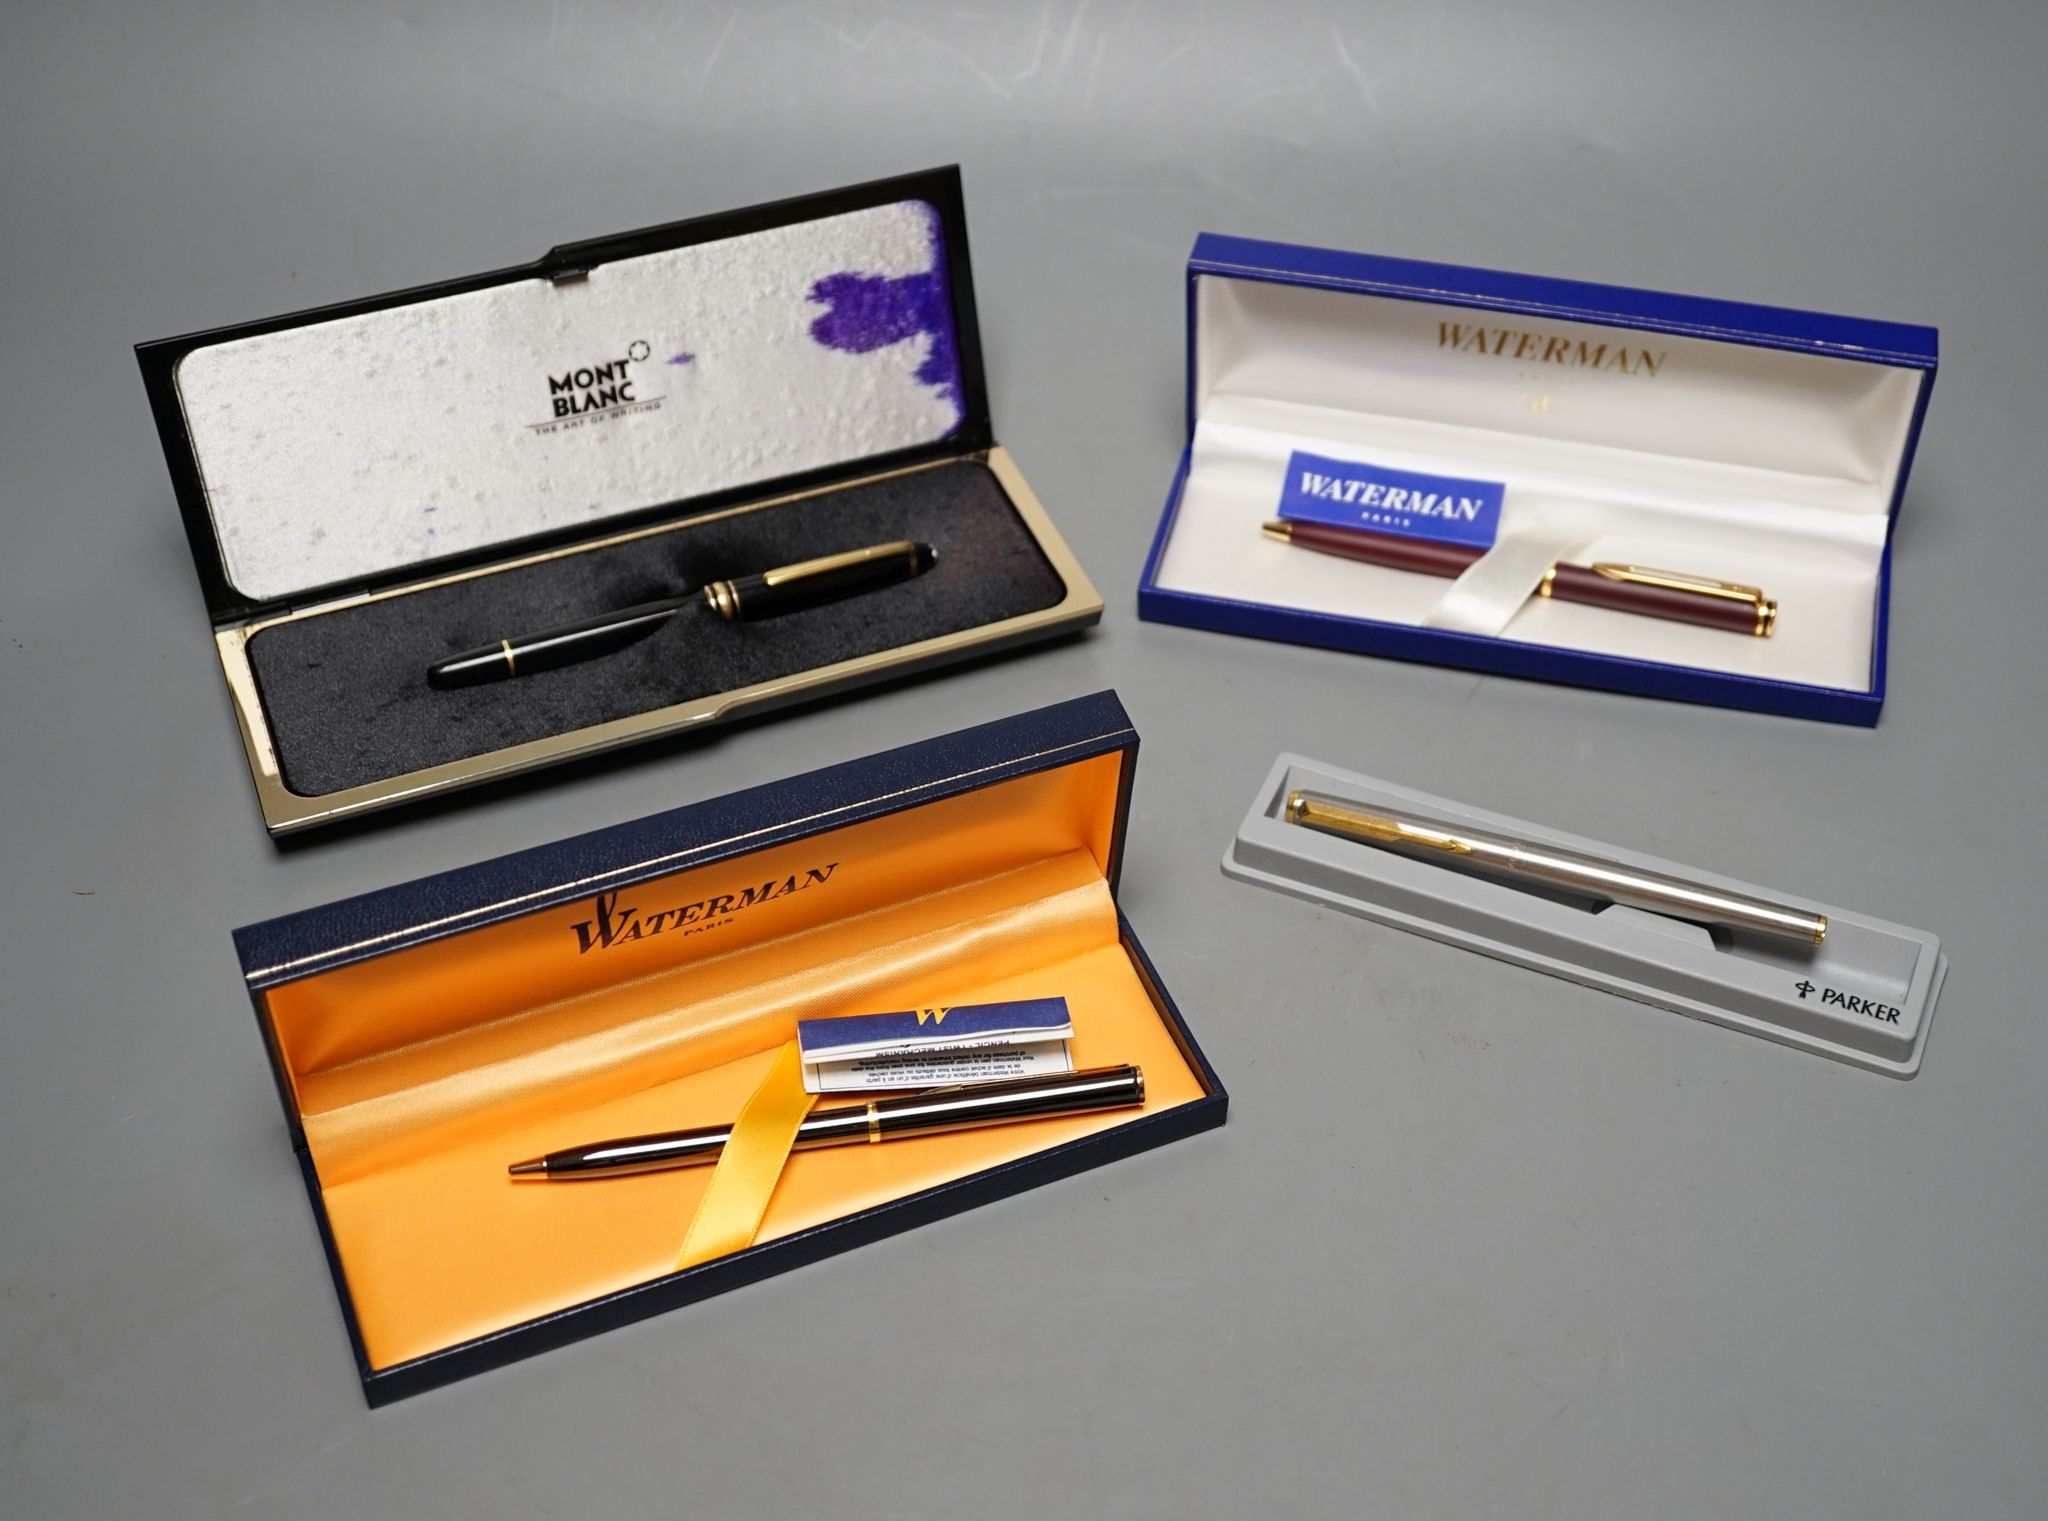 4 pens including Mount Blanc, Parker and two Watermans